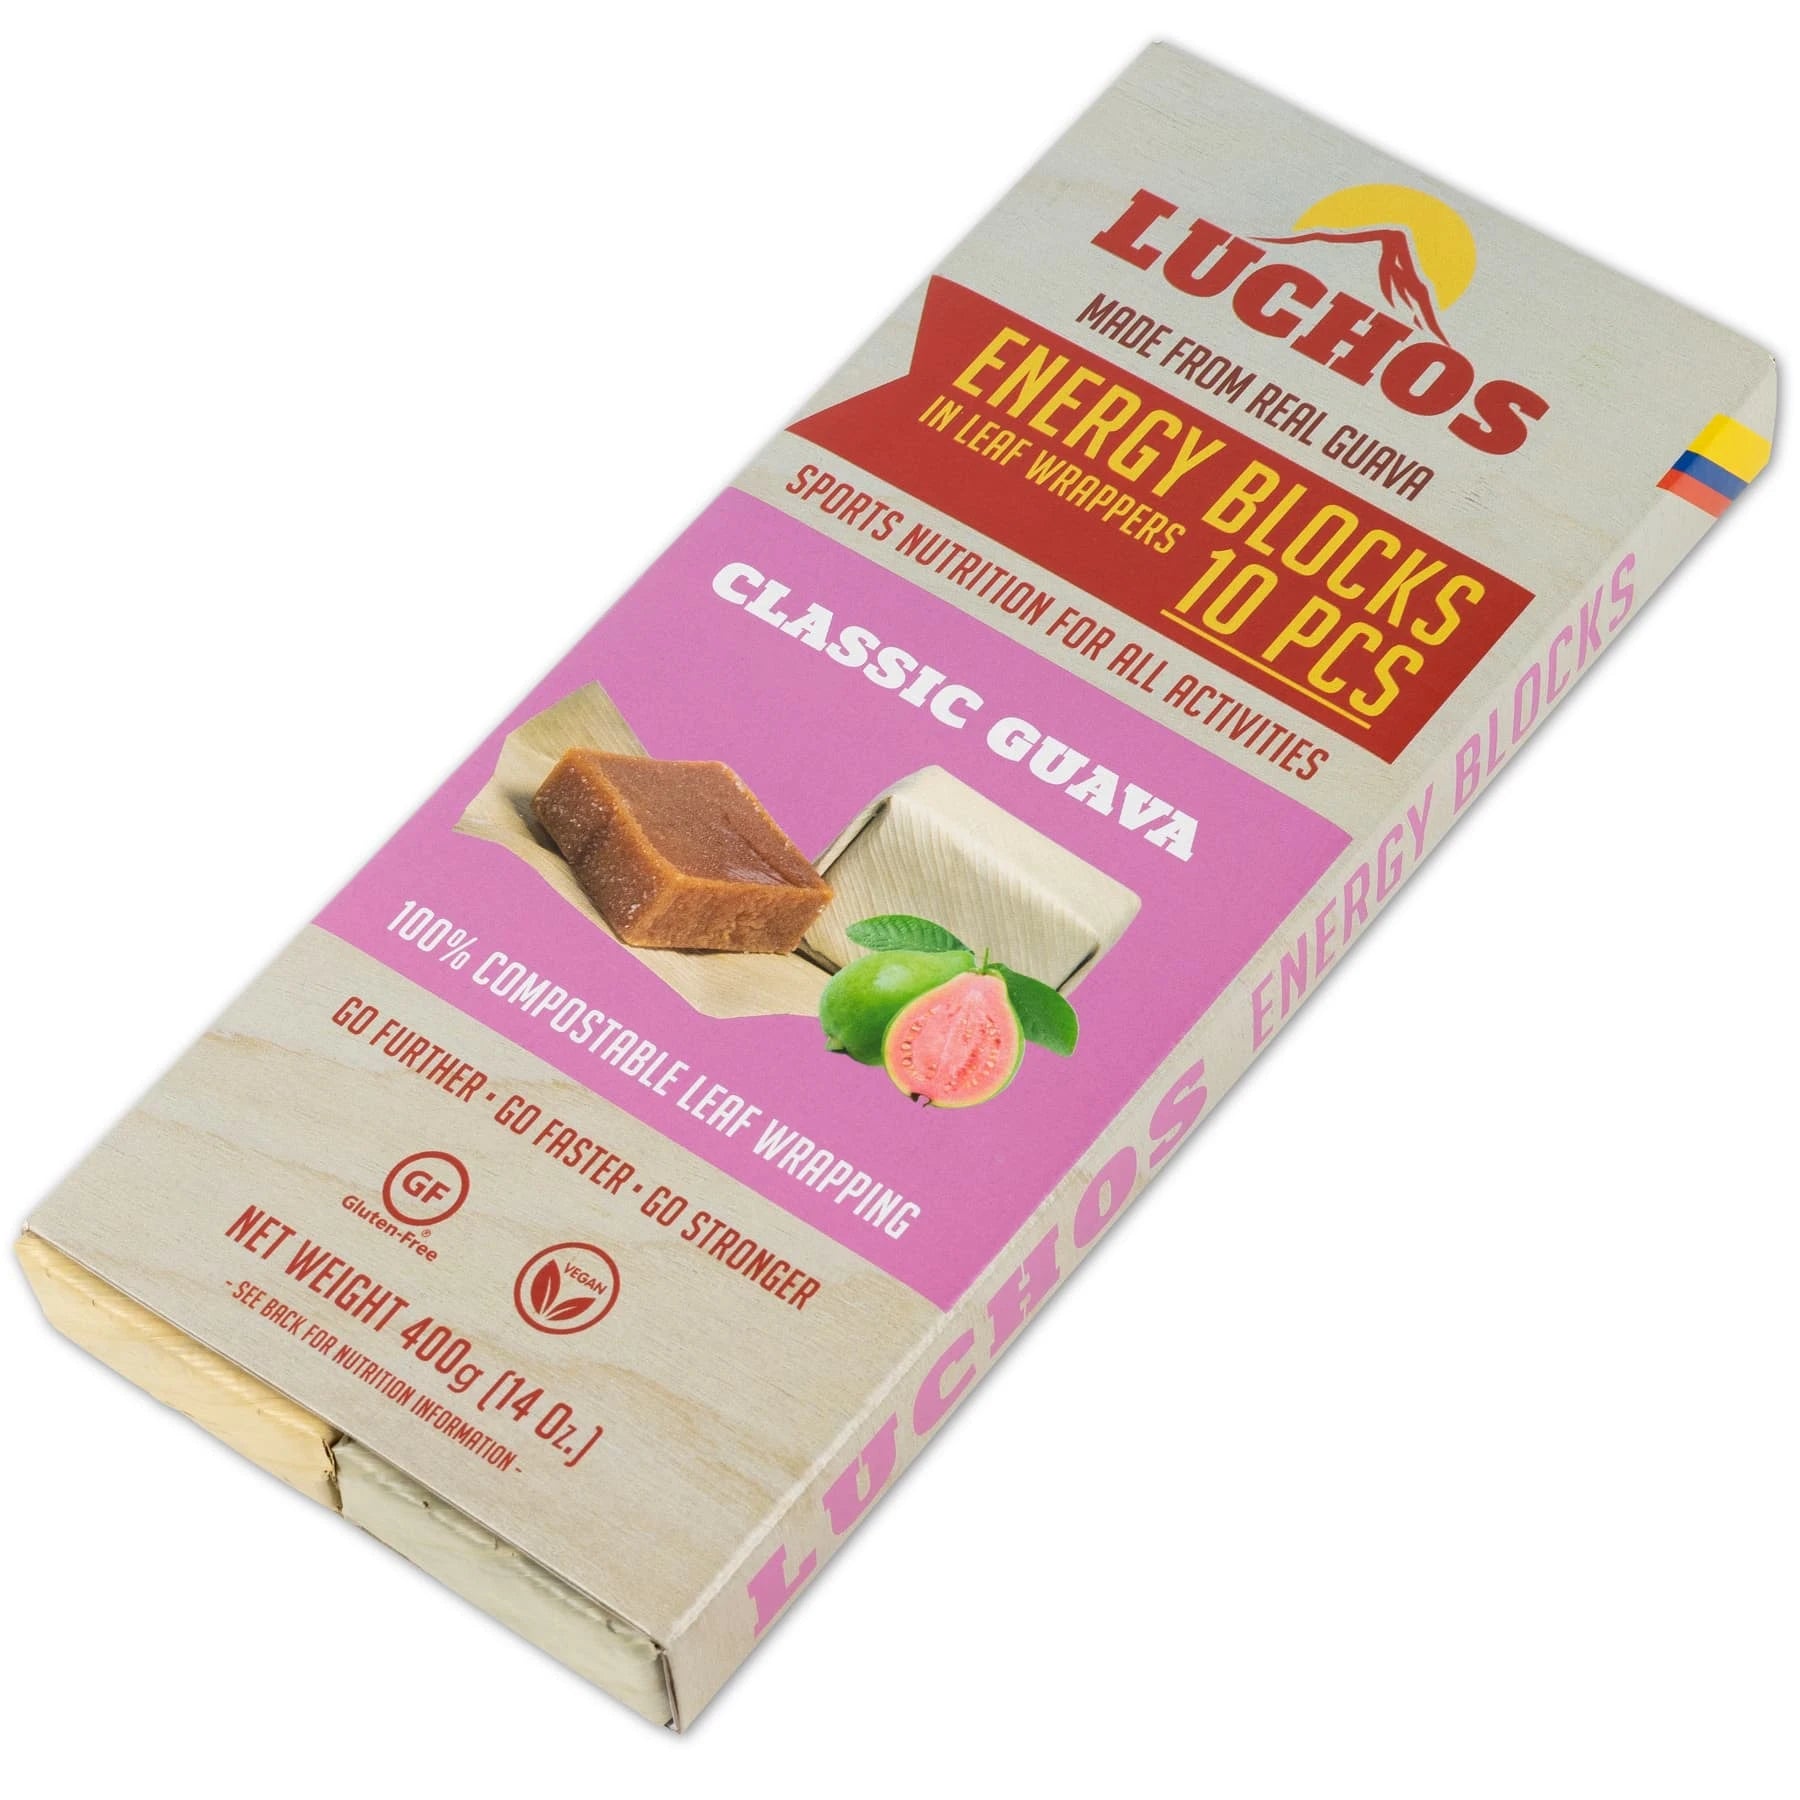 LUCHOS Energy Blocks Pack of 10 - different types